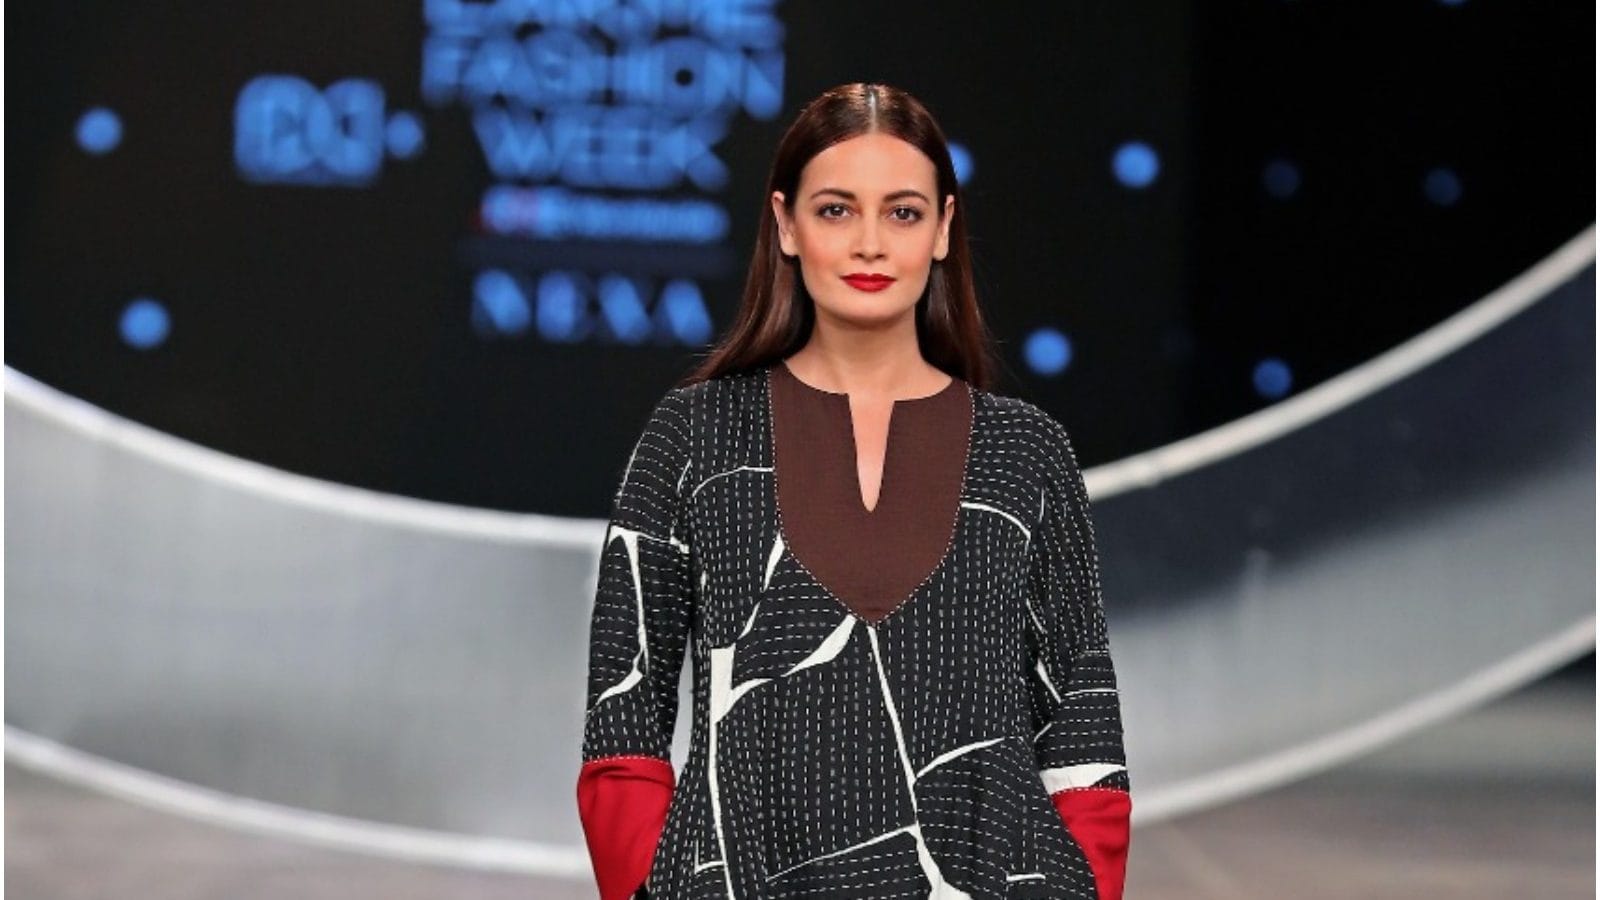 Lakme Fashion Week: This is What Got Dia Mirza Excited - News18